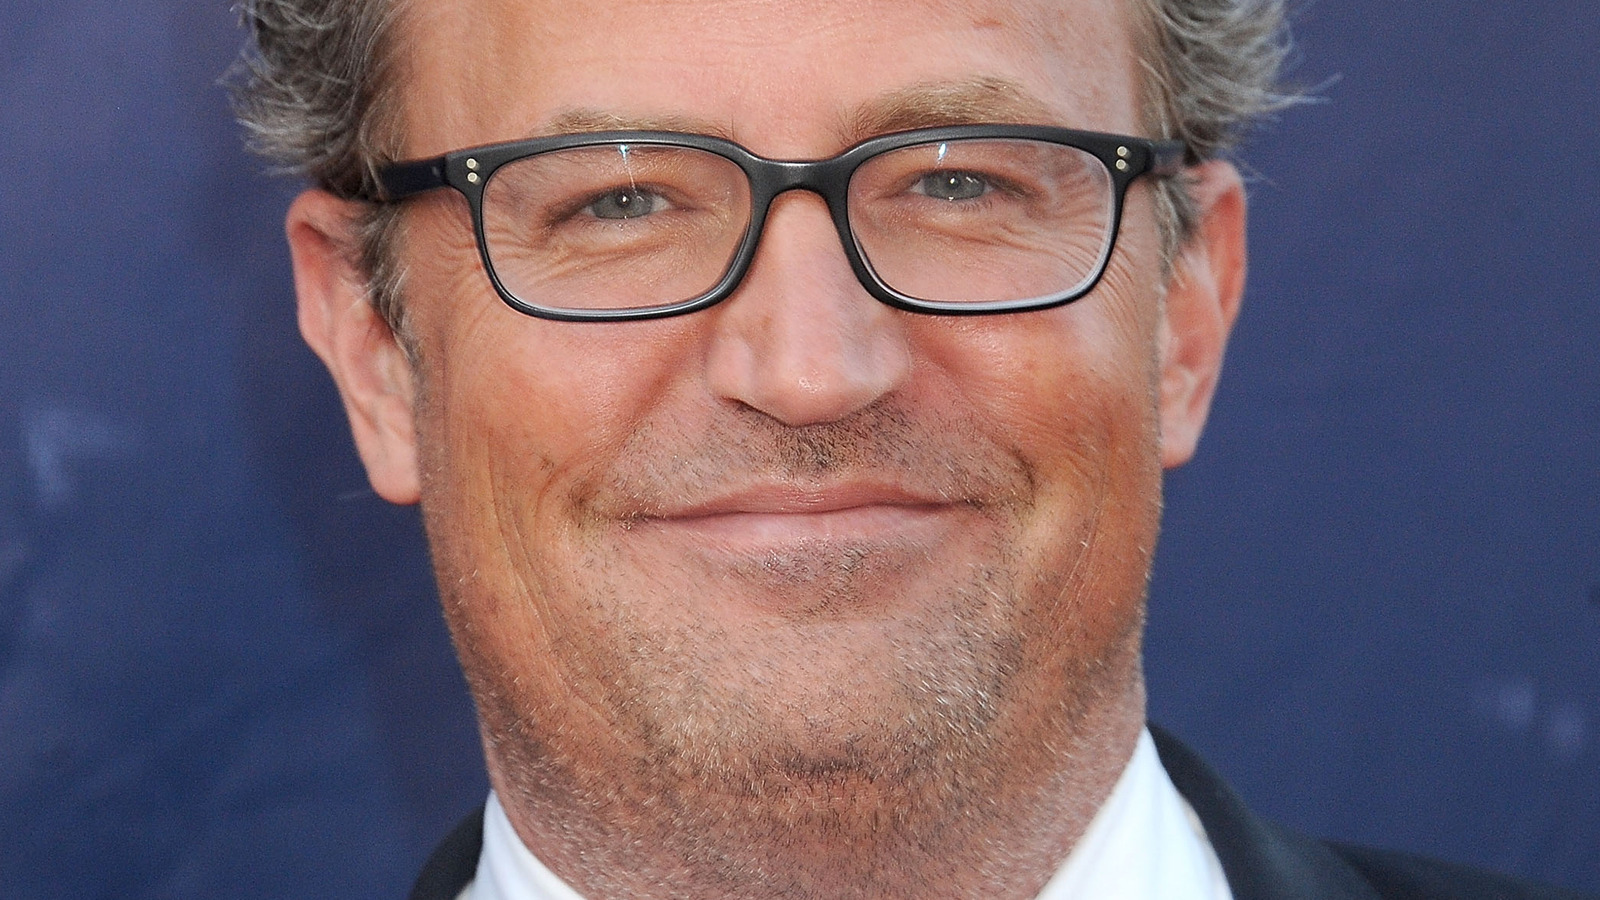 Matthew Perry digs deeper into Diane Sawyer's past double life